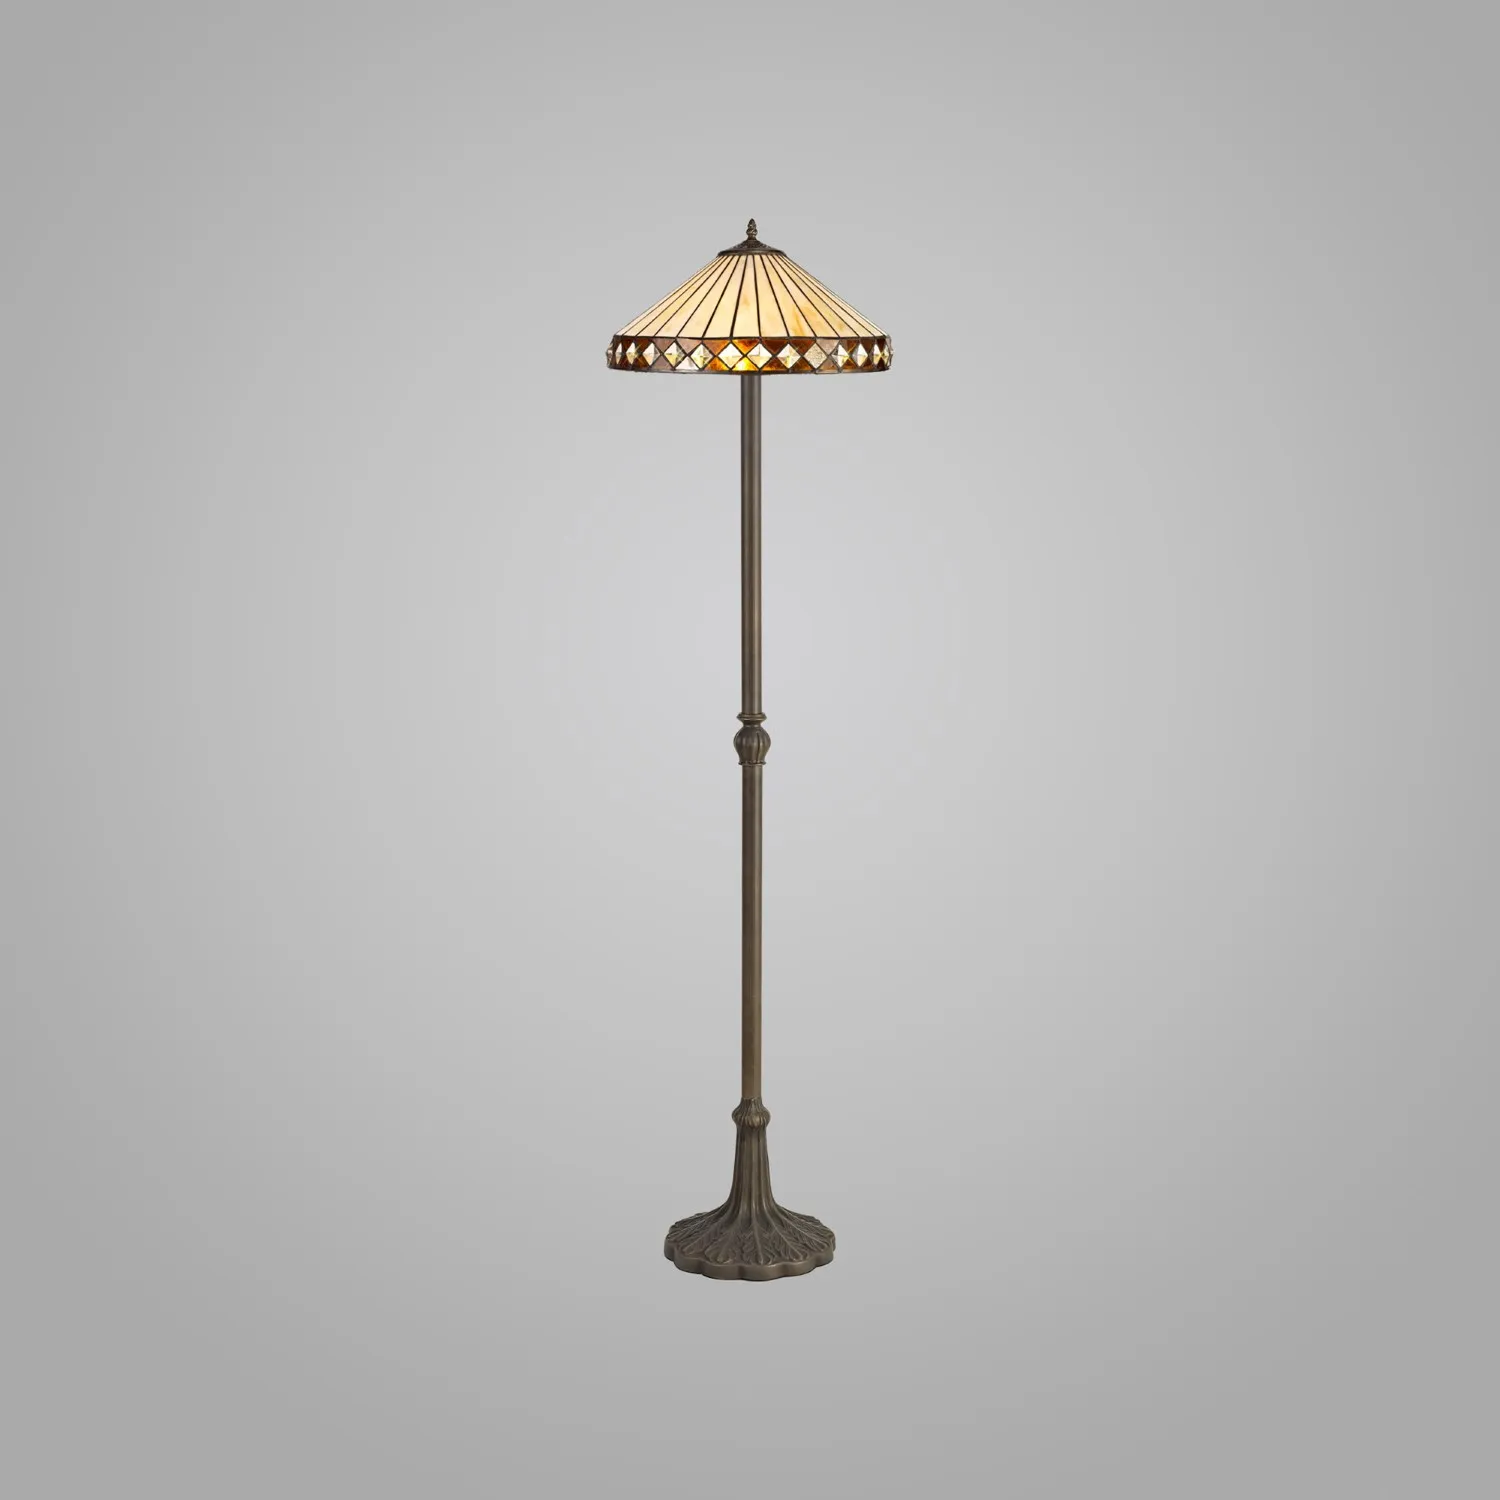 Rayleigh 2 Light Leaf Design Floor Lamp E27 With 40cm Tiffany Shade, Amber Cream Crystal Aged Antique Brass